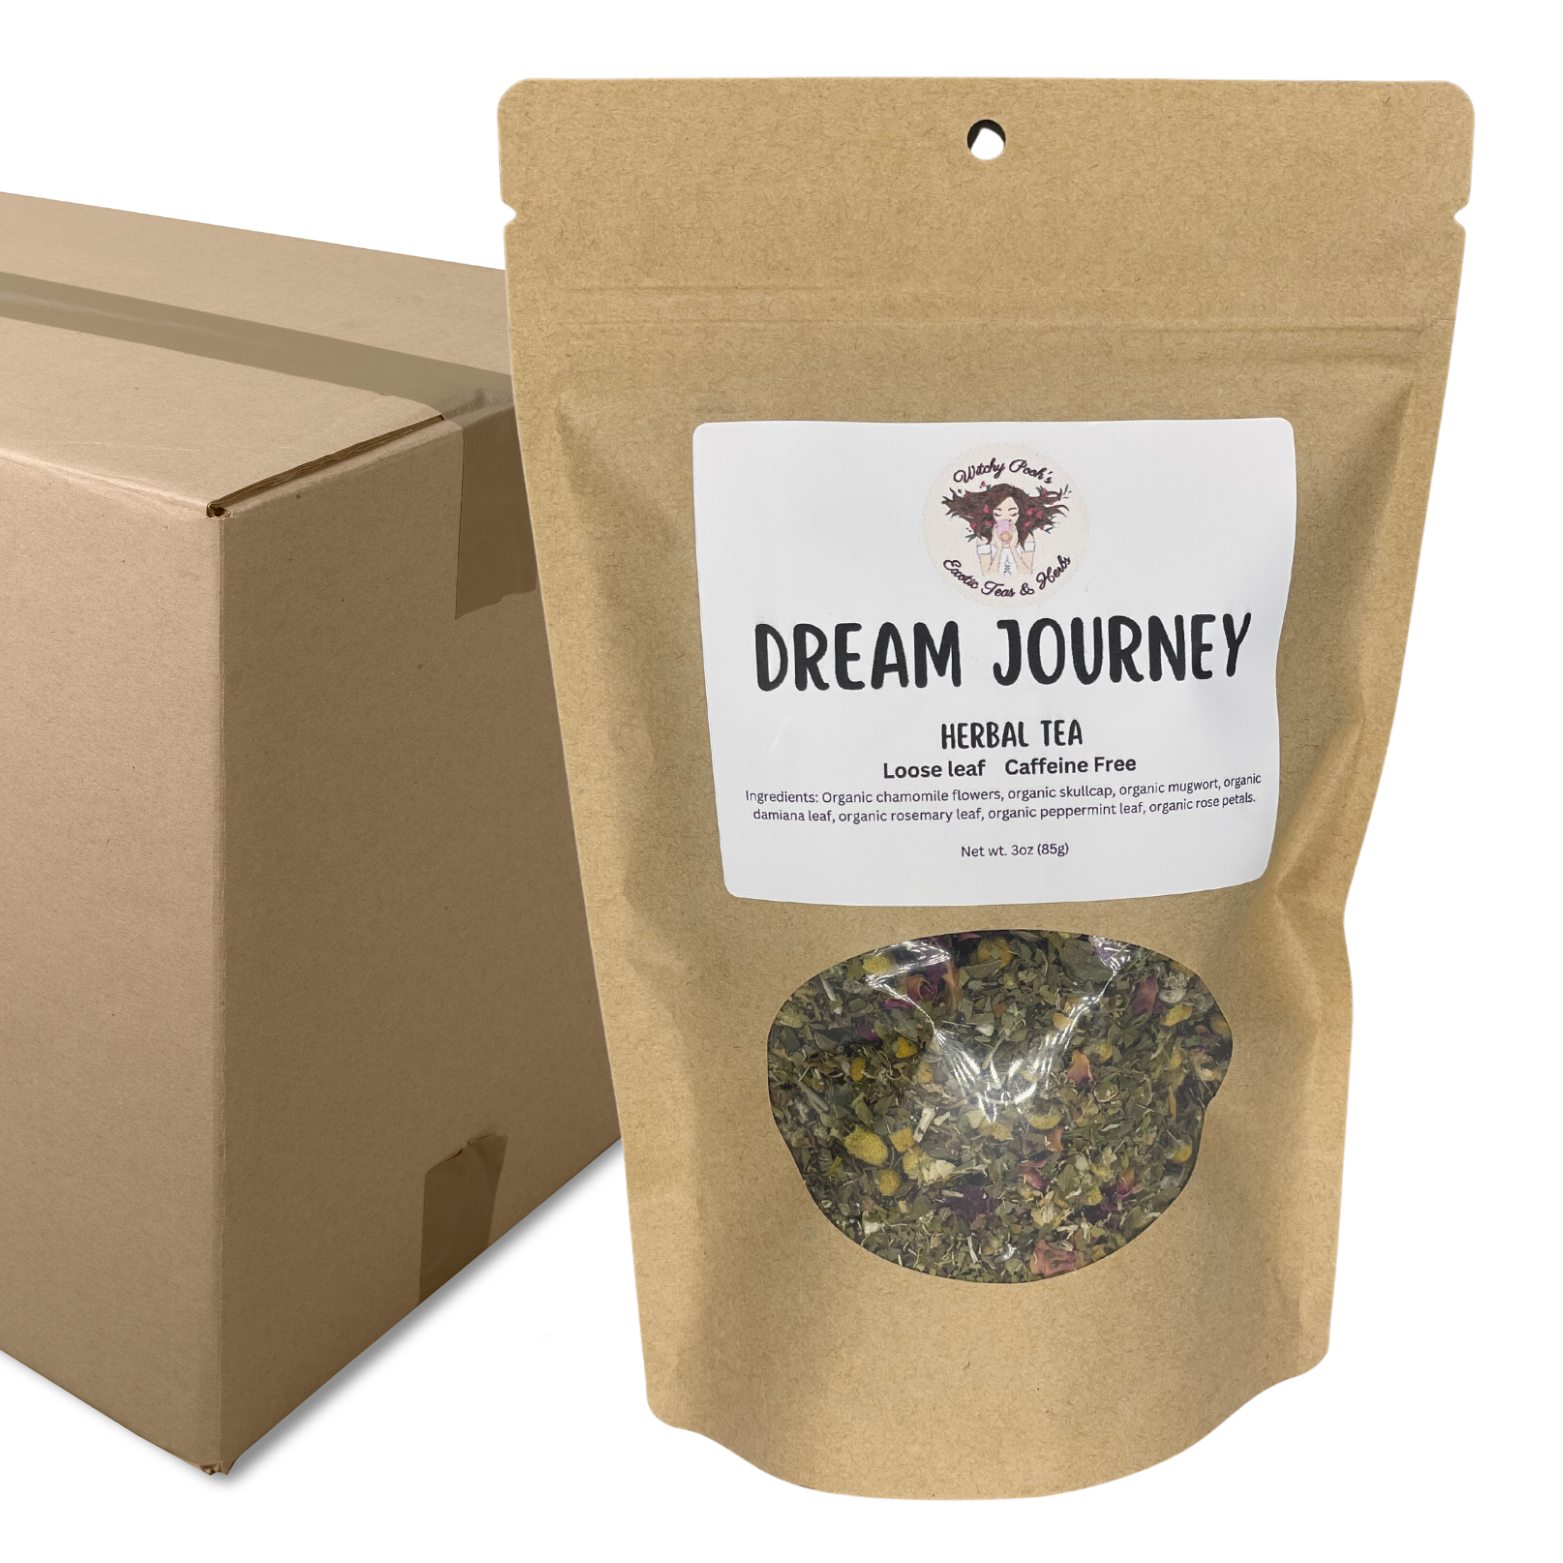 Witchy Pooh's Dream Journey Loose Leaf Organic Functional Tea to Sleep and Enhance Dreaming, Caffeine Free-13